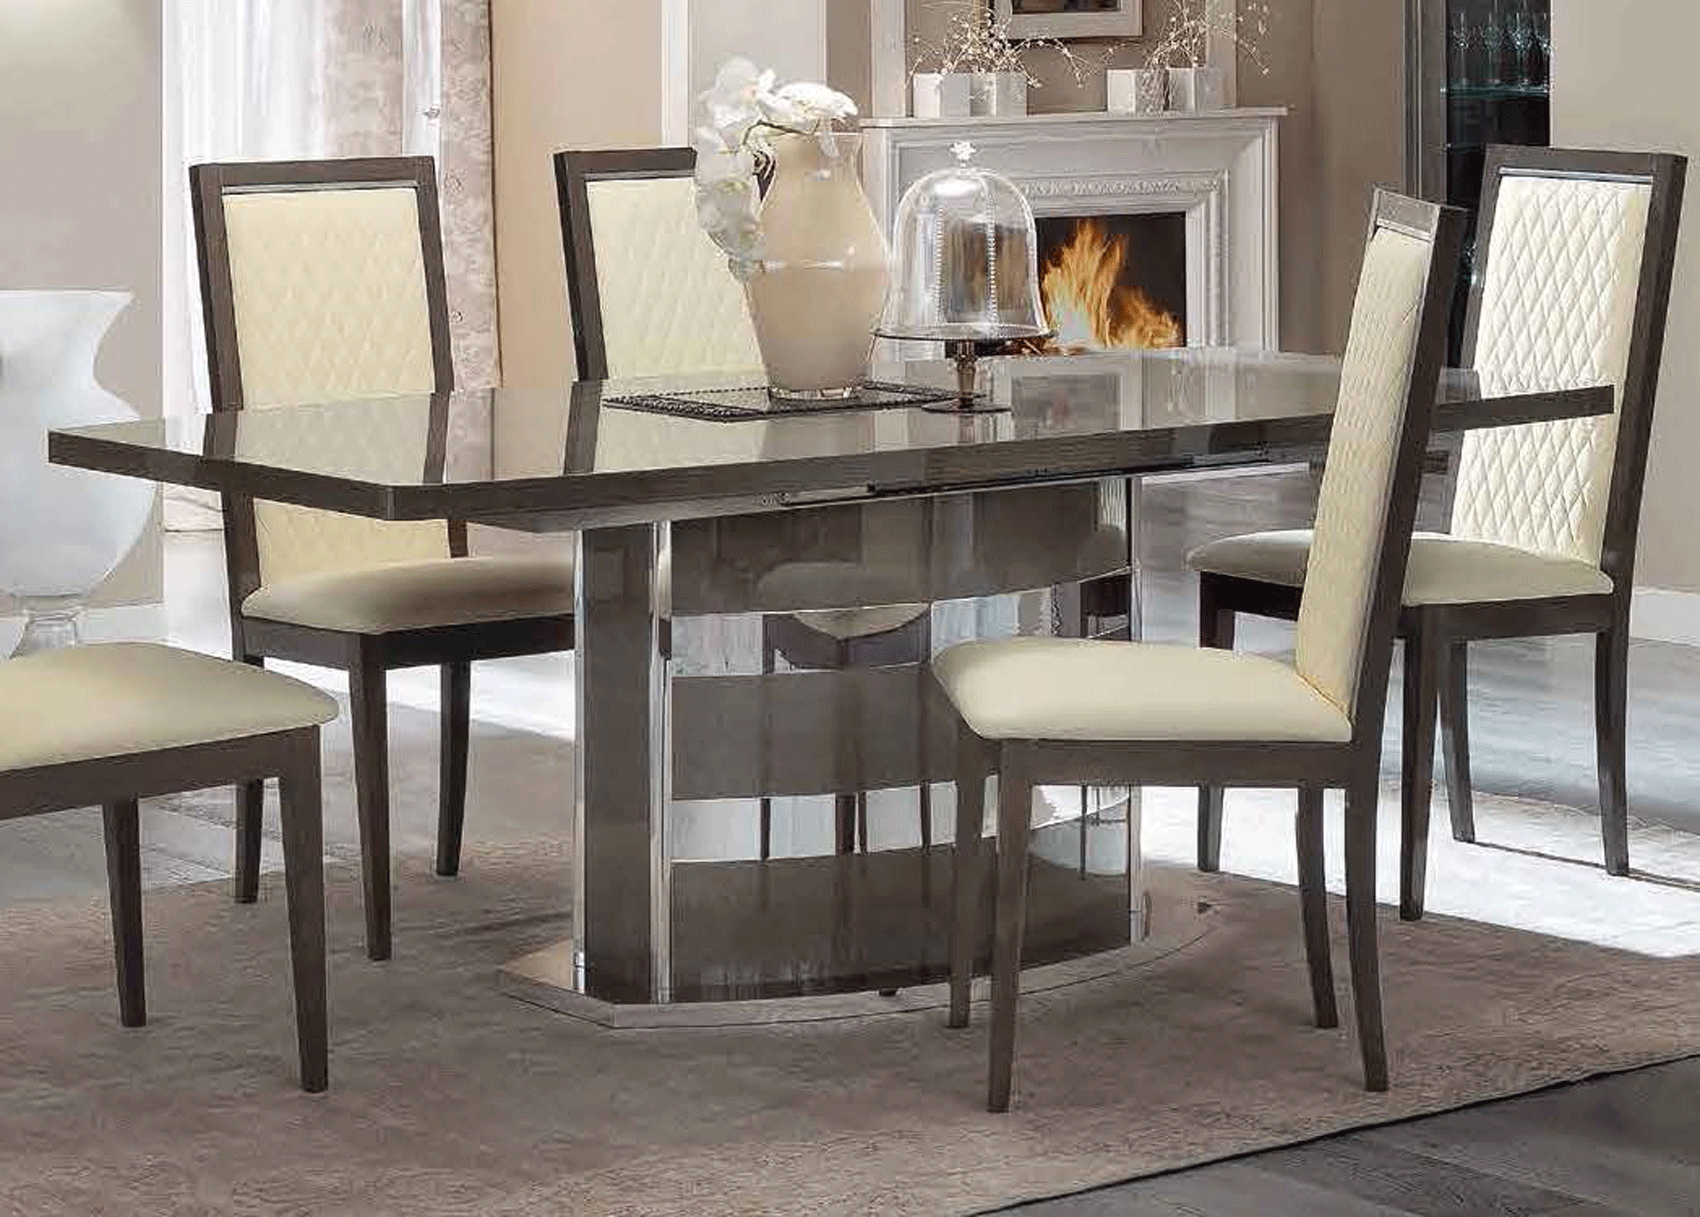 Brands Camel Gold Collection, Italy Platinum FIXED Dining Table 160 Only